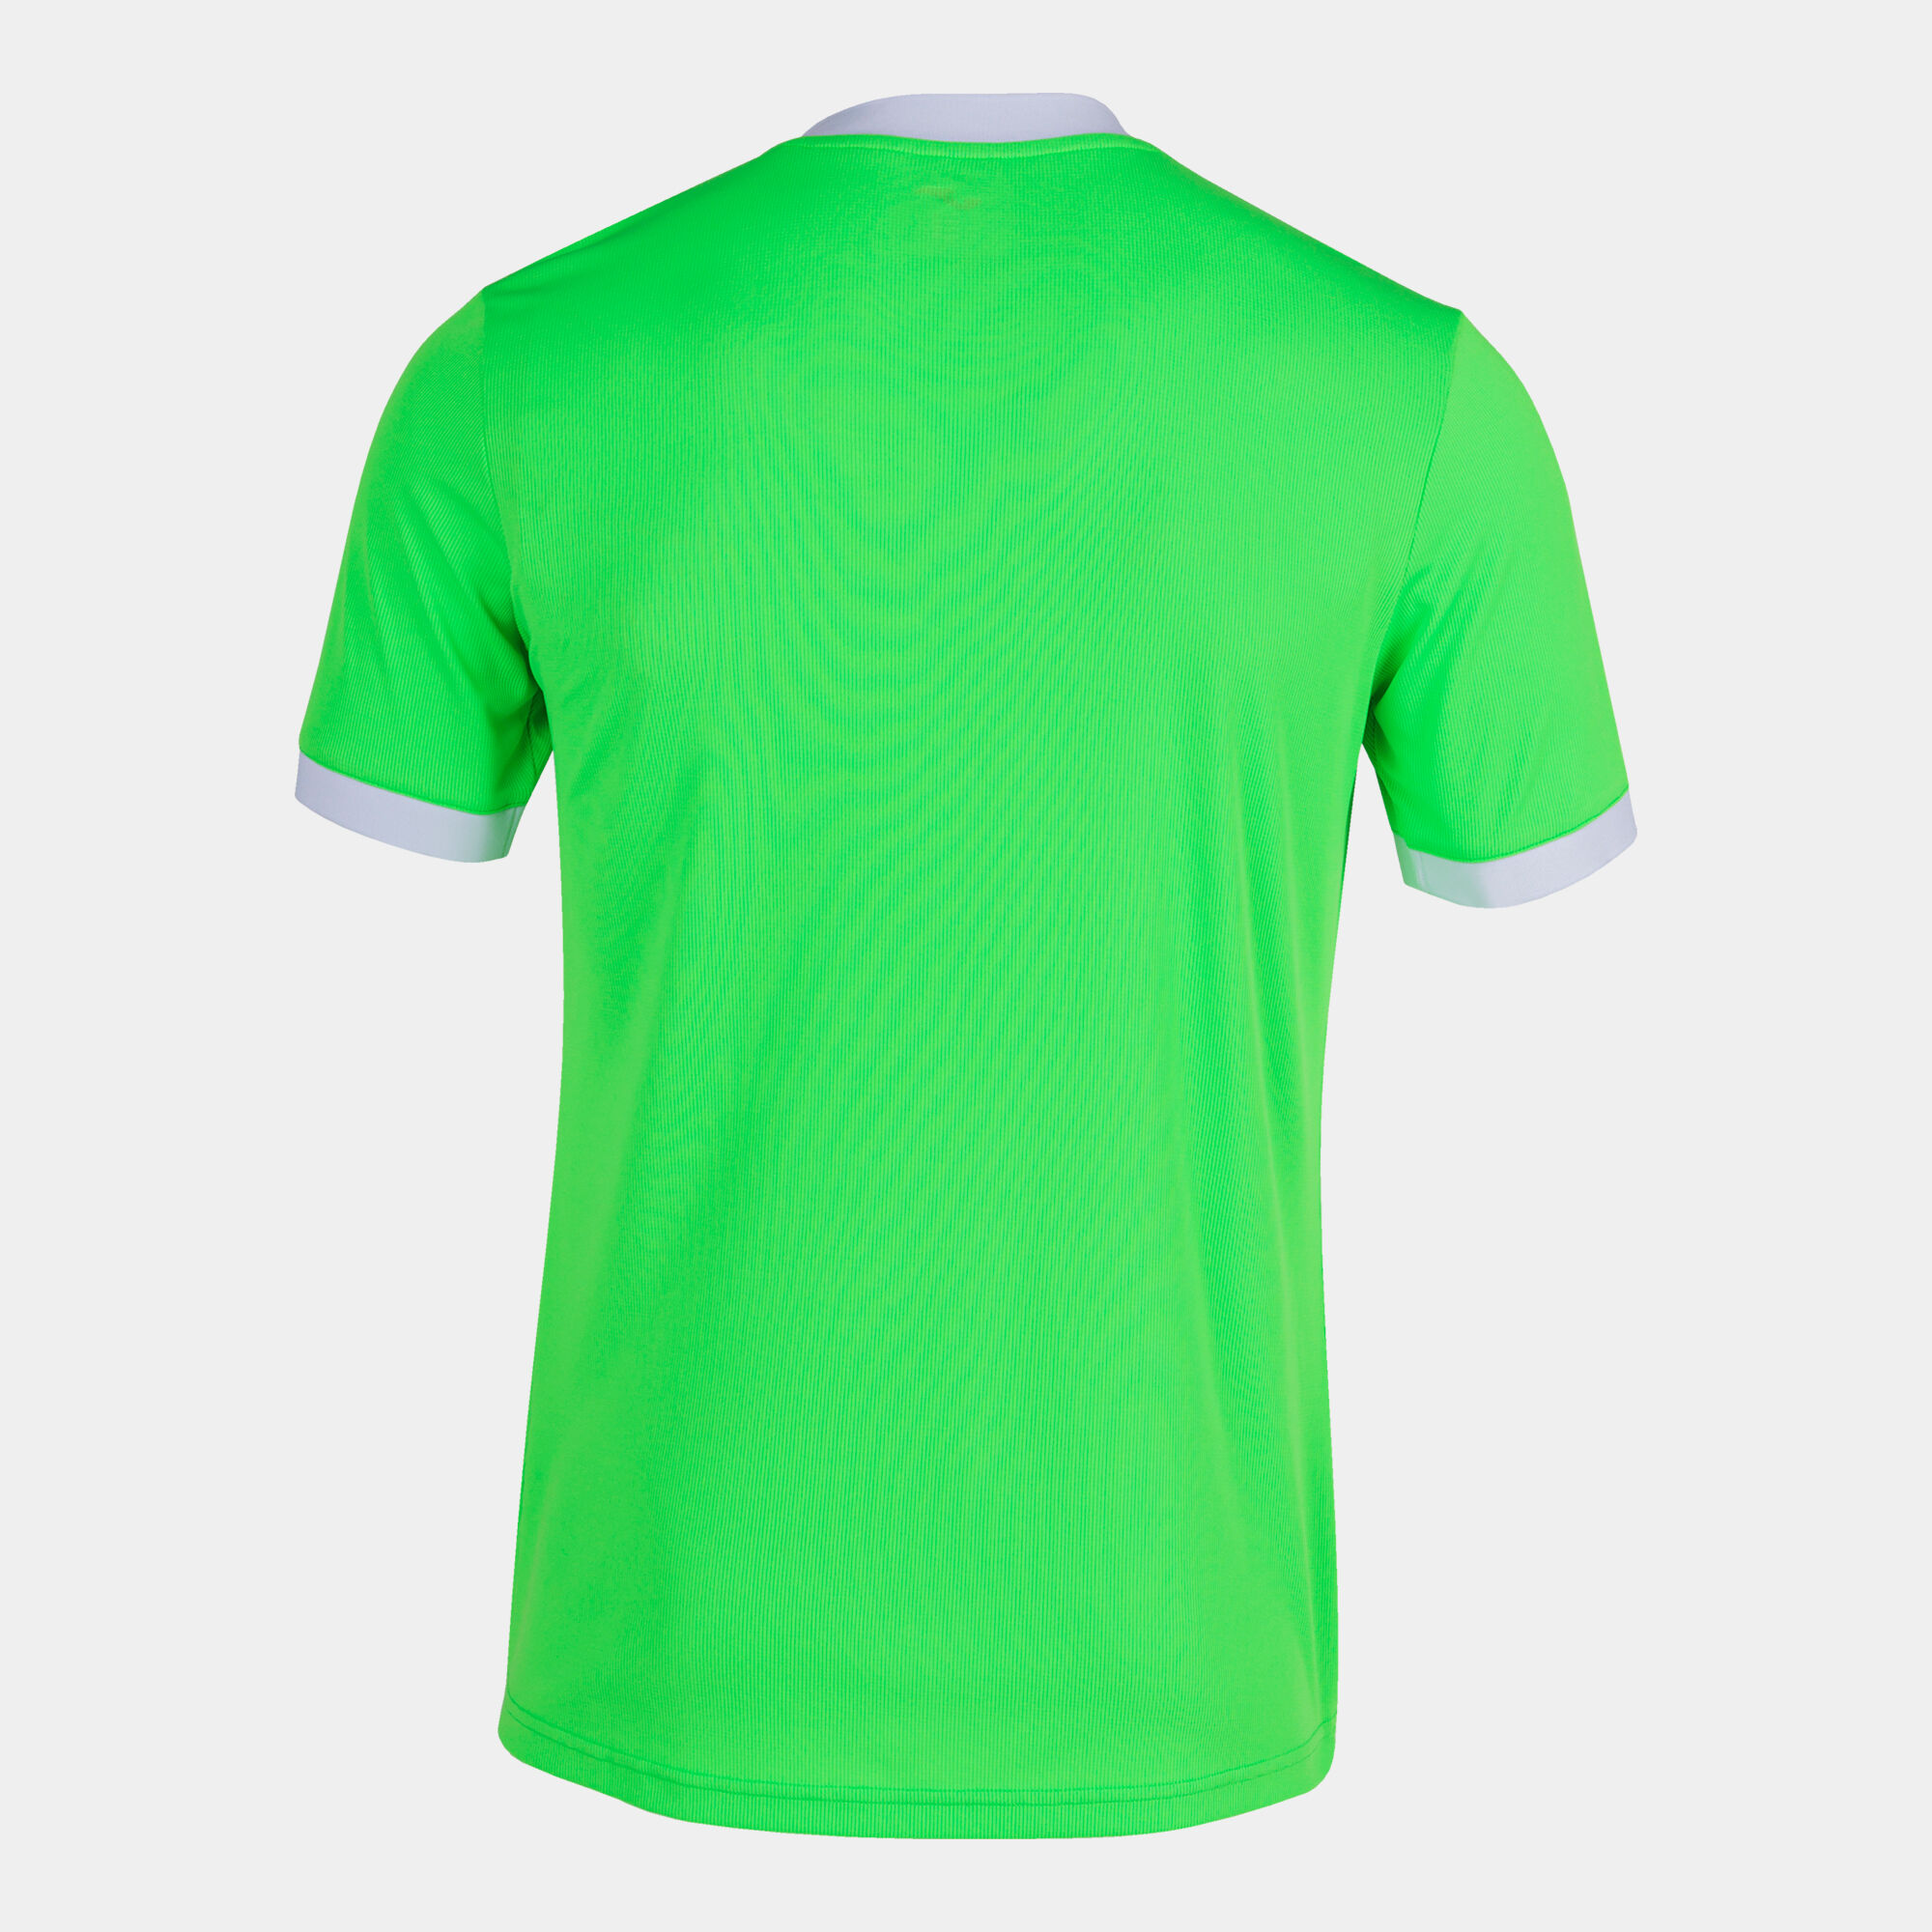 Maillot manches courtes homme Open III vert fluo